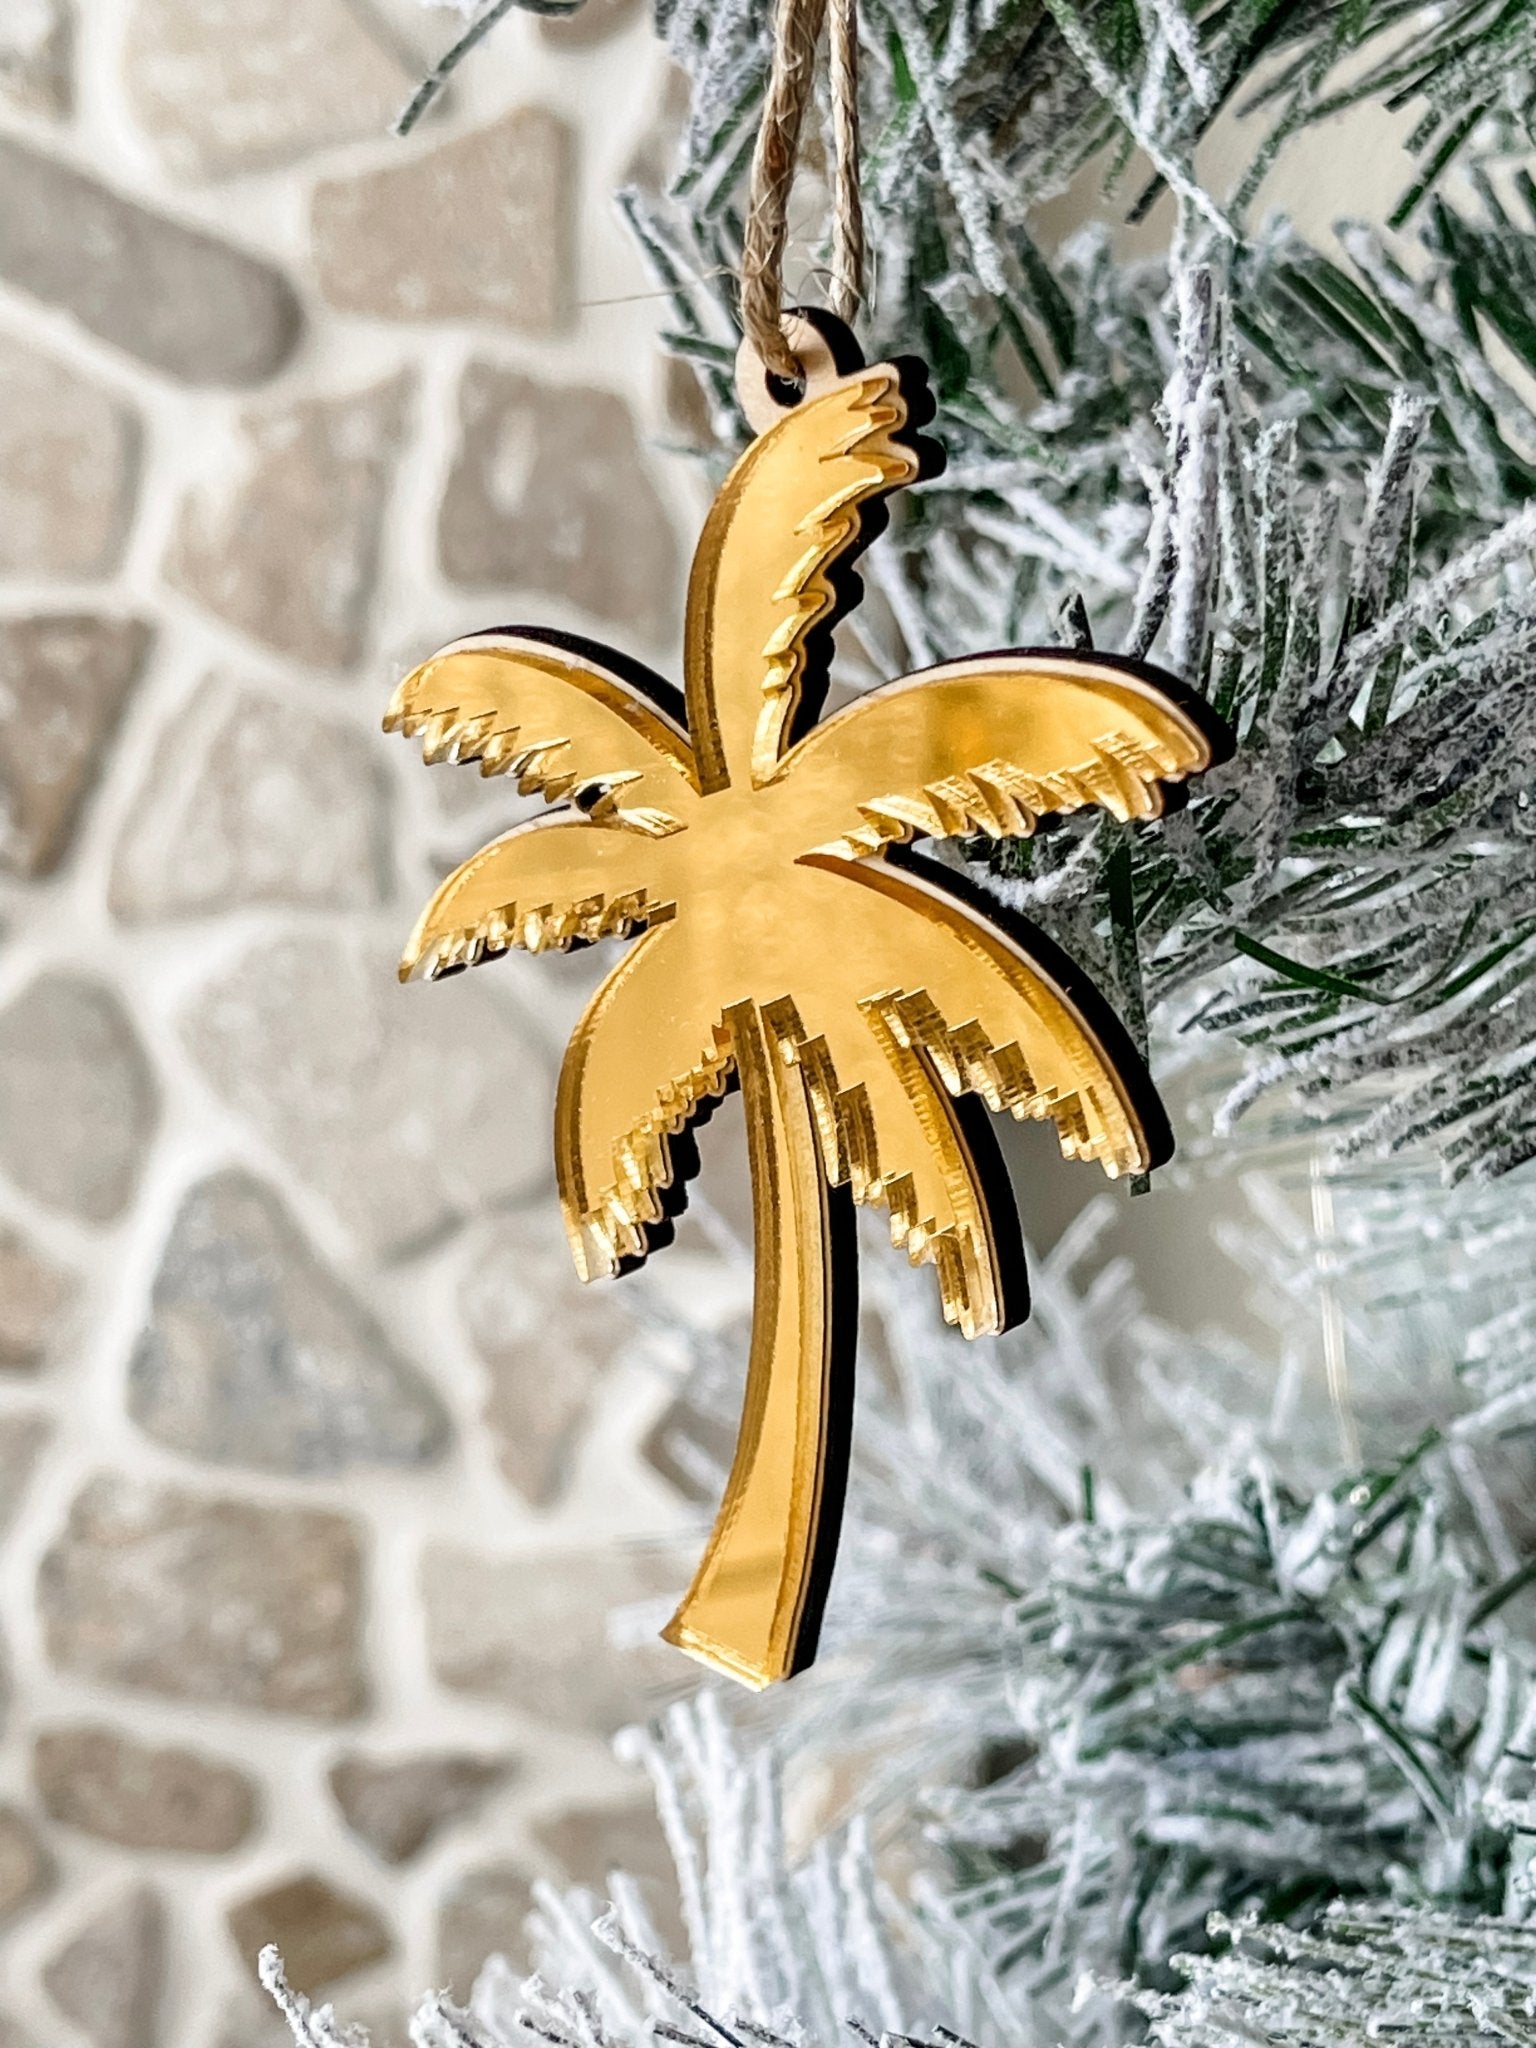 Beach Ornament - Golden Palm Tree - The Humble Gift Co.